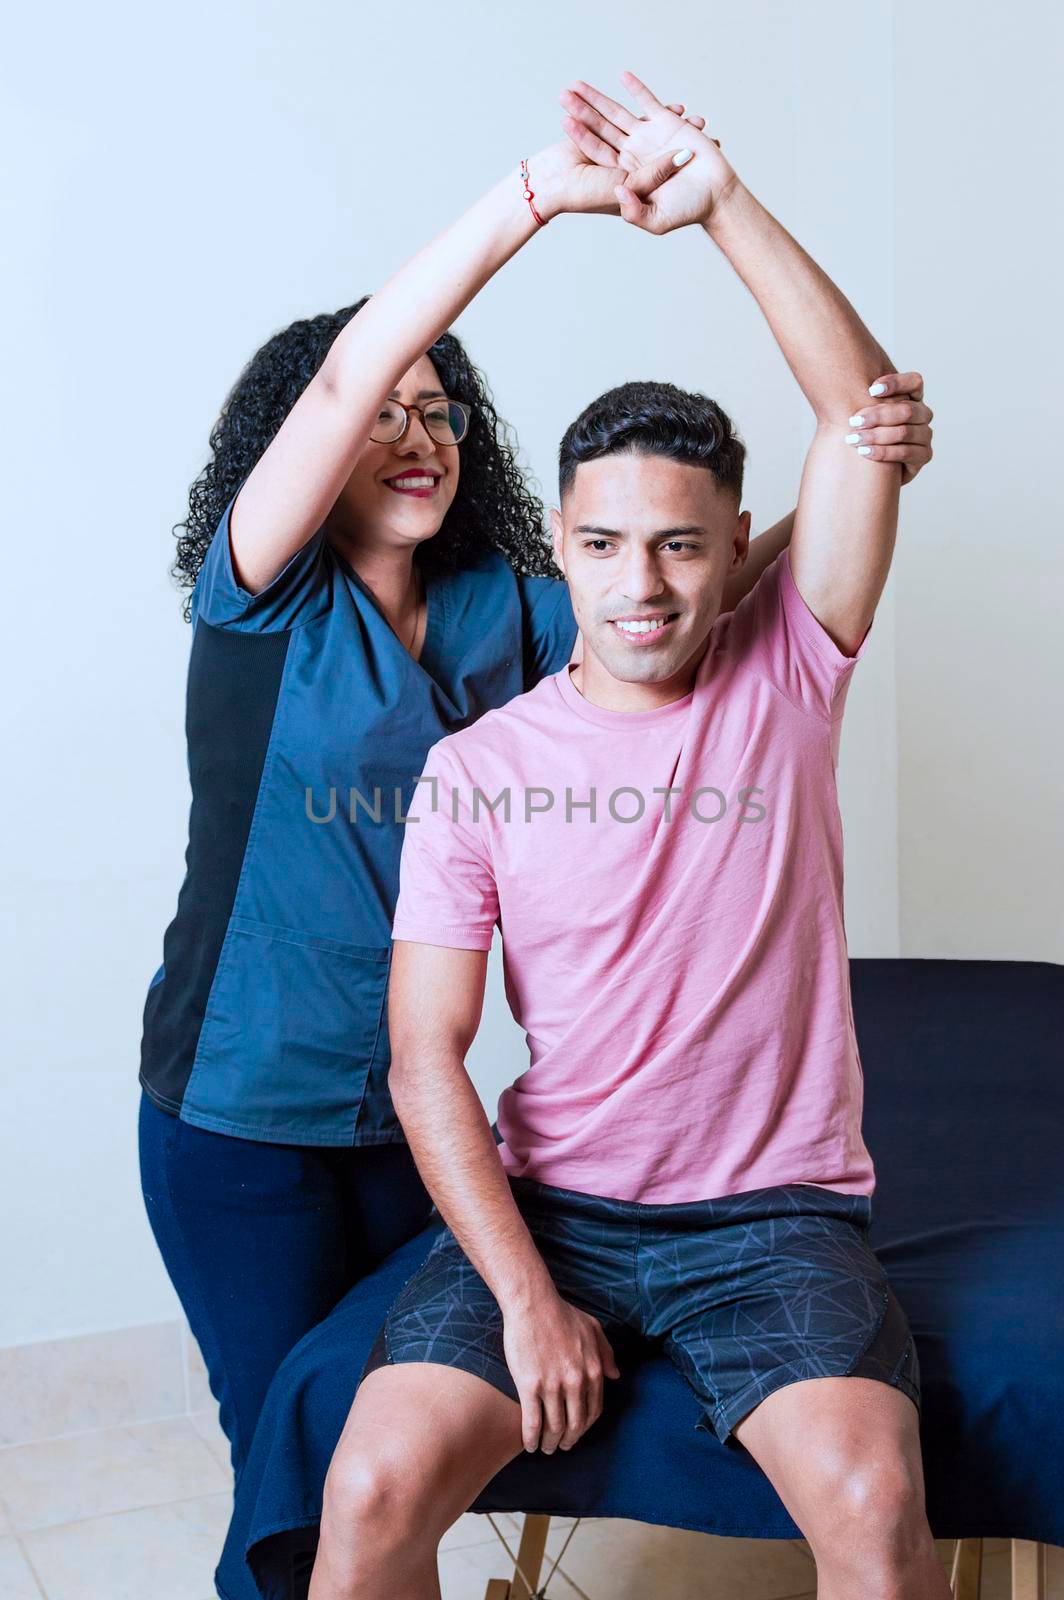 shoulder and elbow physical therapy, shoulder assessment physical therapist, elbow rehabilitation physical therapy, by isaiphoto